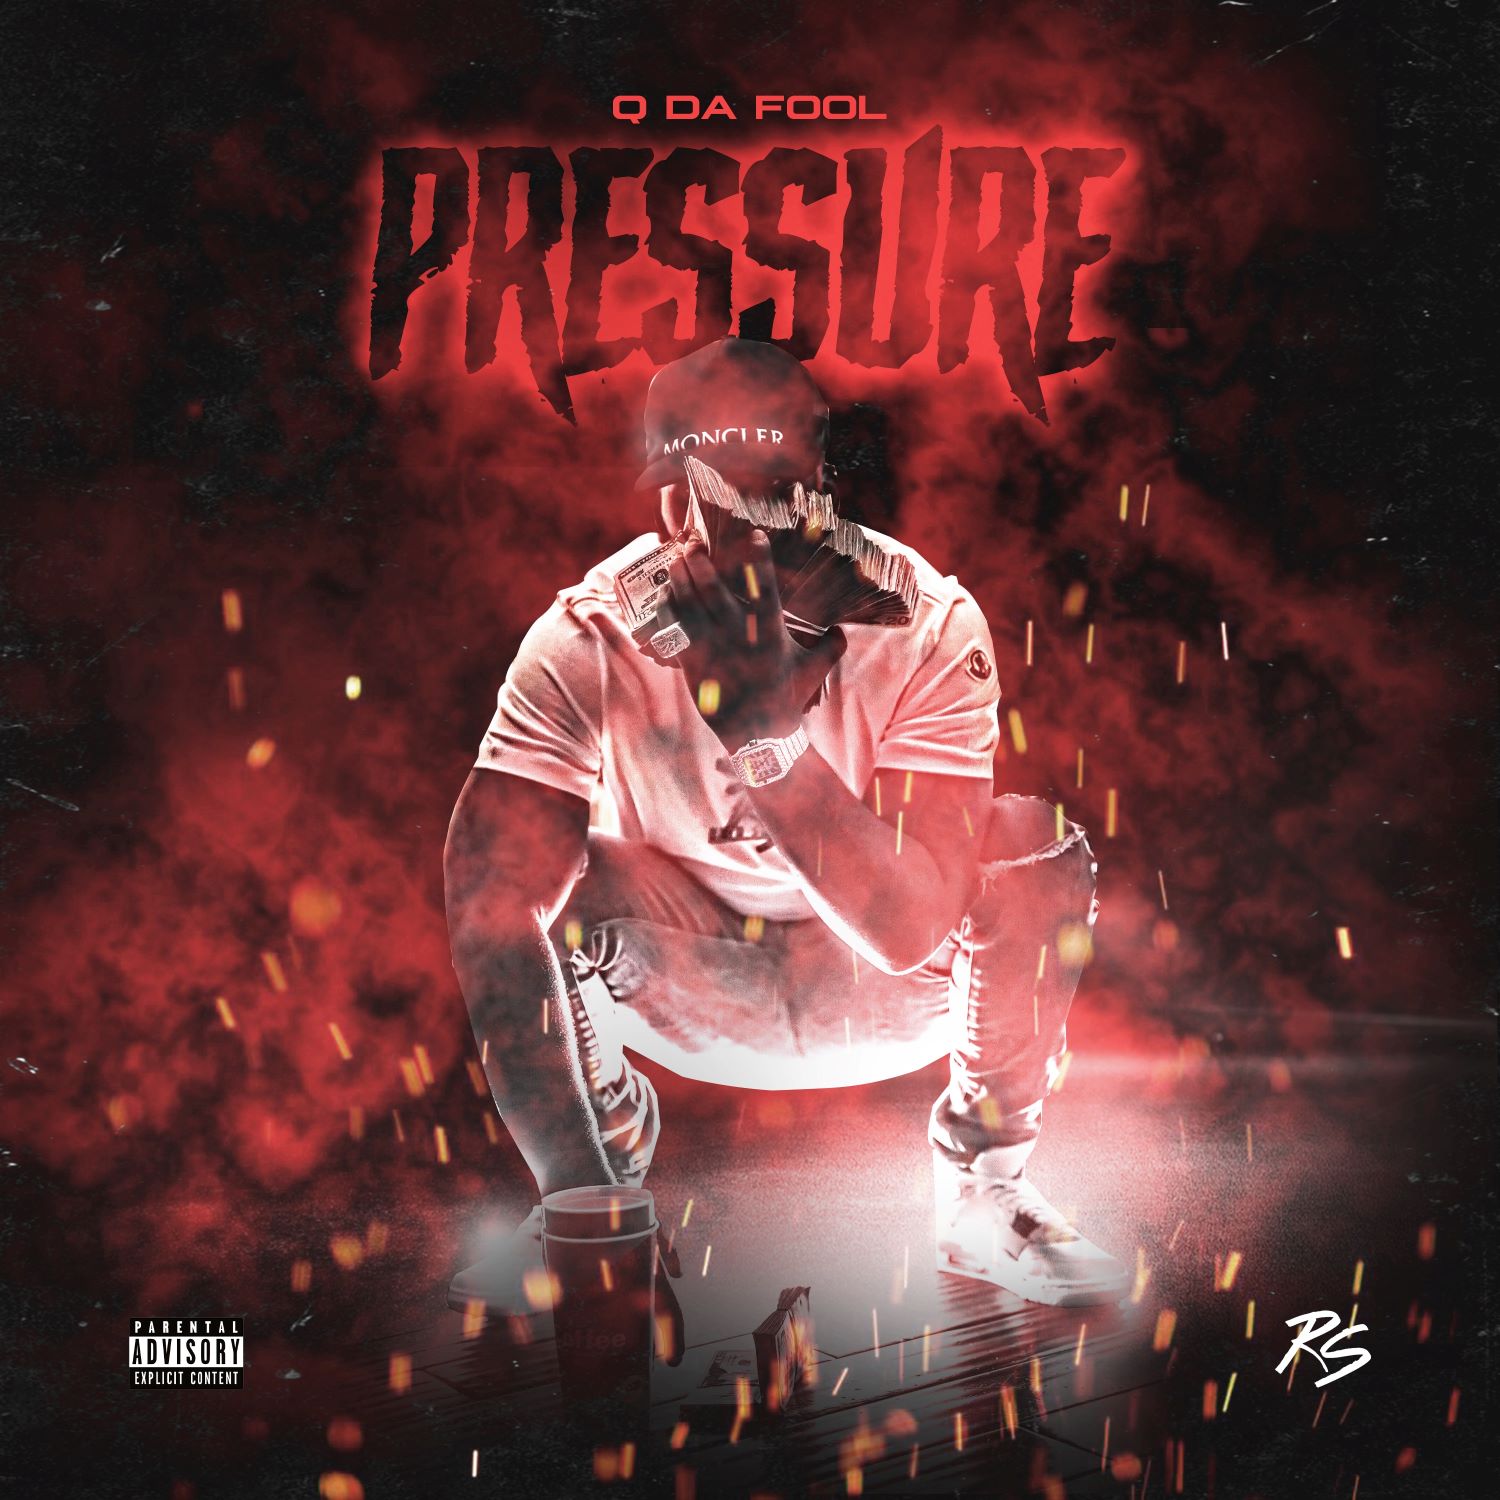 Q Da Fool Releases Pressure Via ONErpm for this weeks Rap New Music Friday